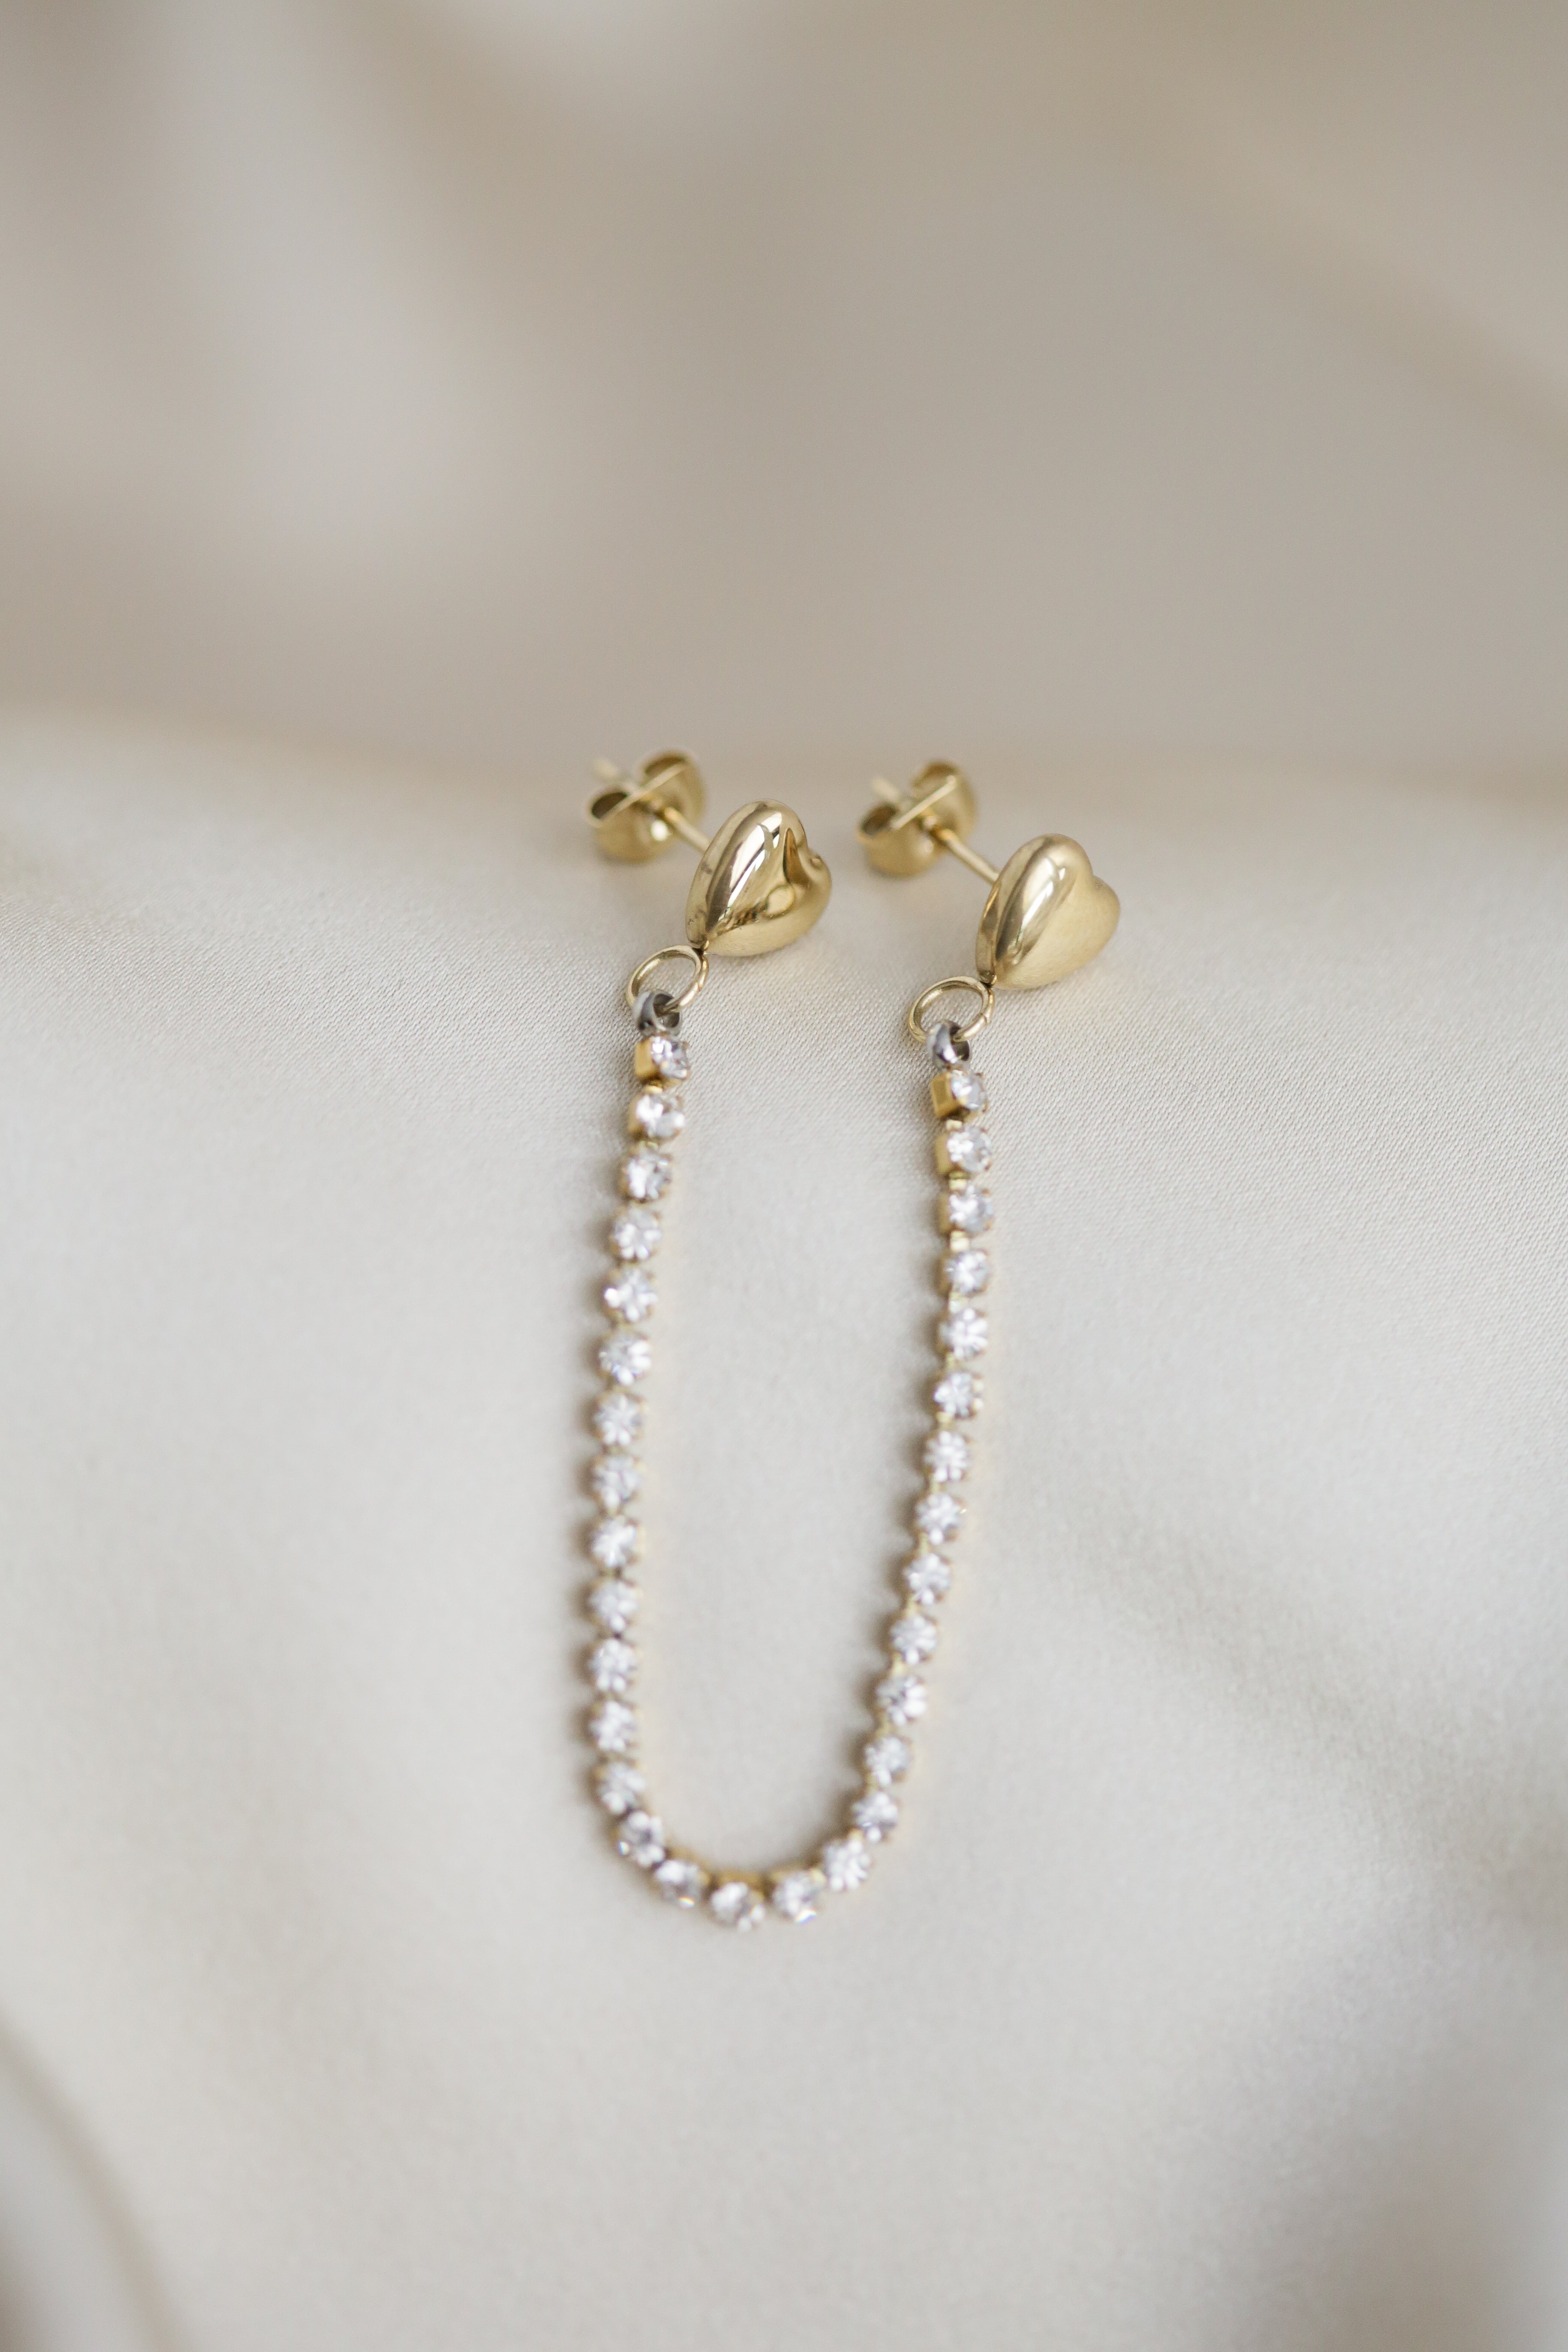 The Heart - Double Studs - Boutique Minimaliste has waterproof, durable, elegant and vintage inspired jewelry